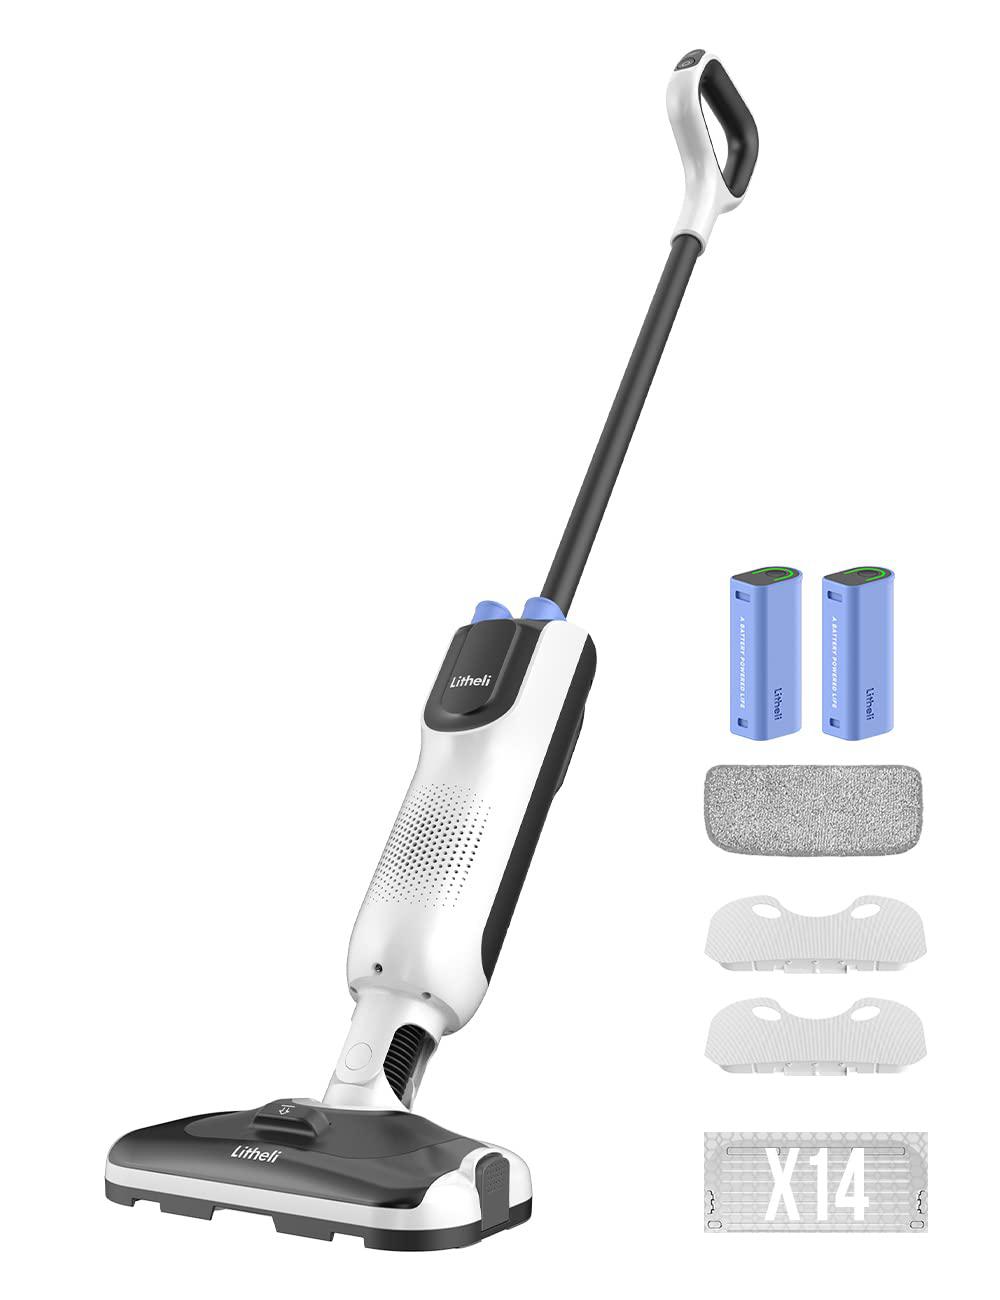 litheli cordless vacuum mop cleaner, 2-in-1 hard floor stick vacuum, wet dry mop, 2 disposable dust boxes, 14 disposable pads